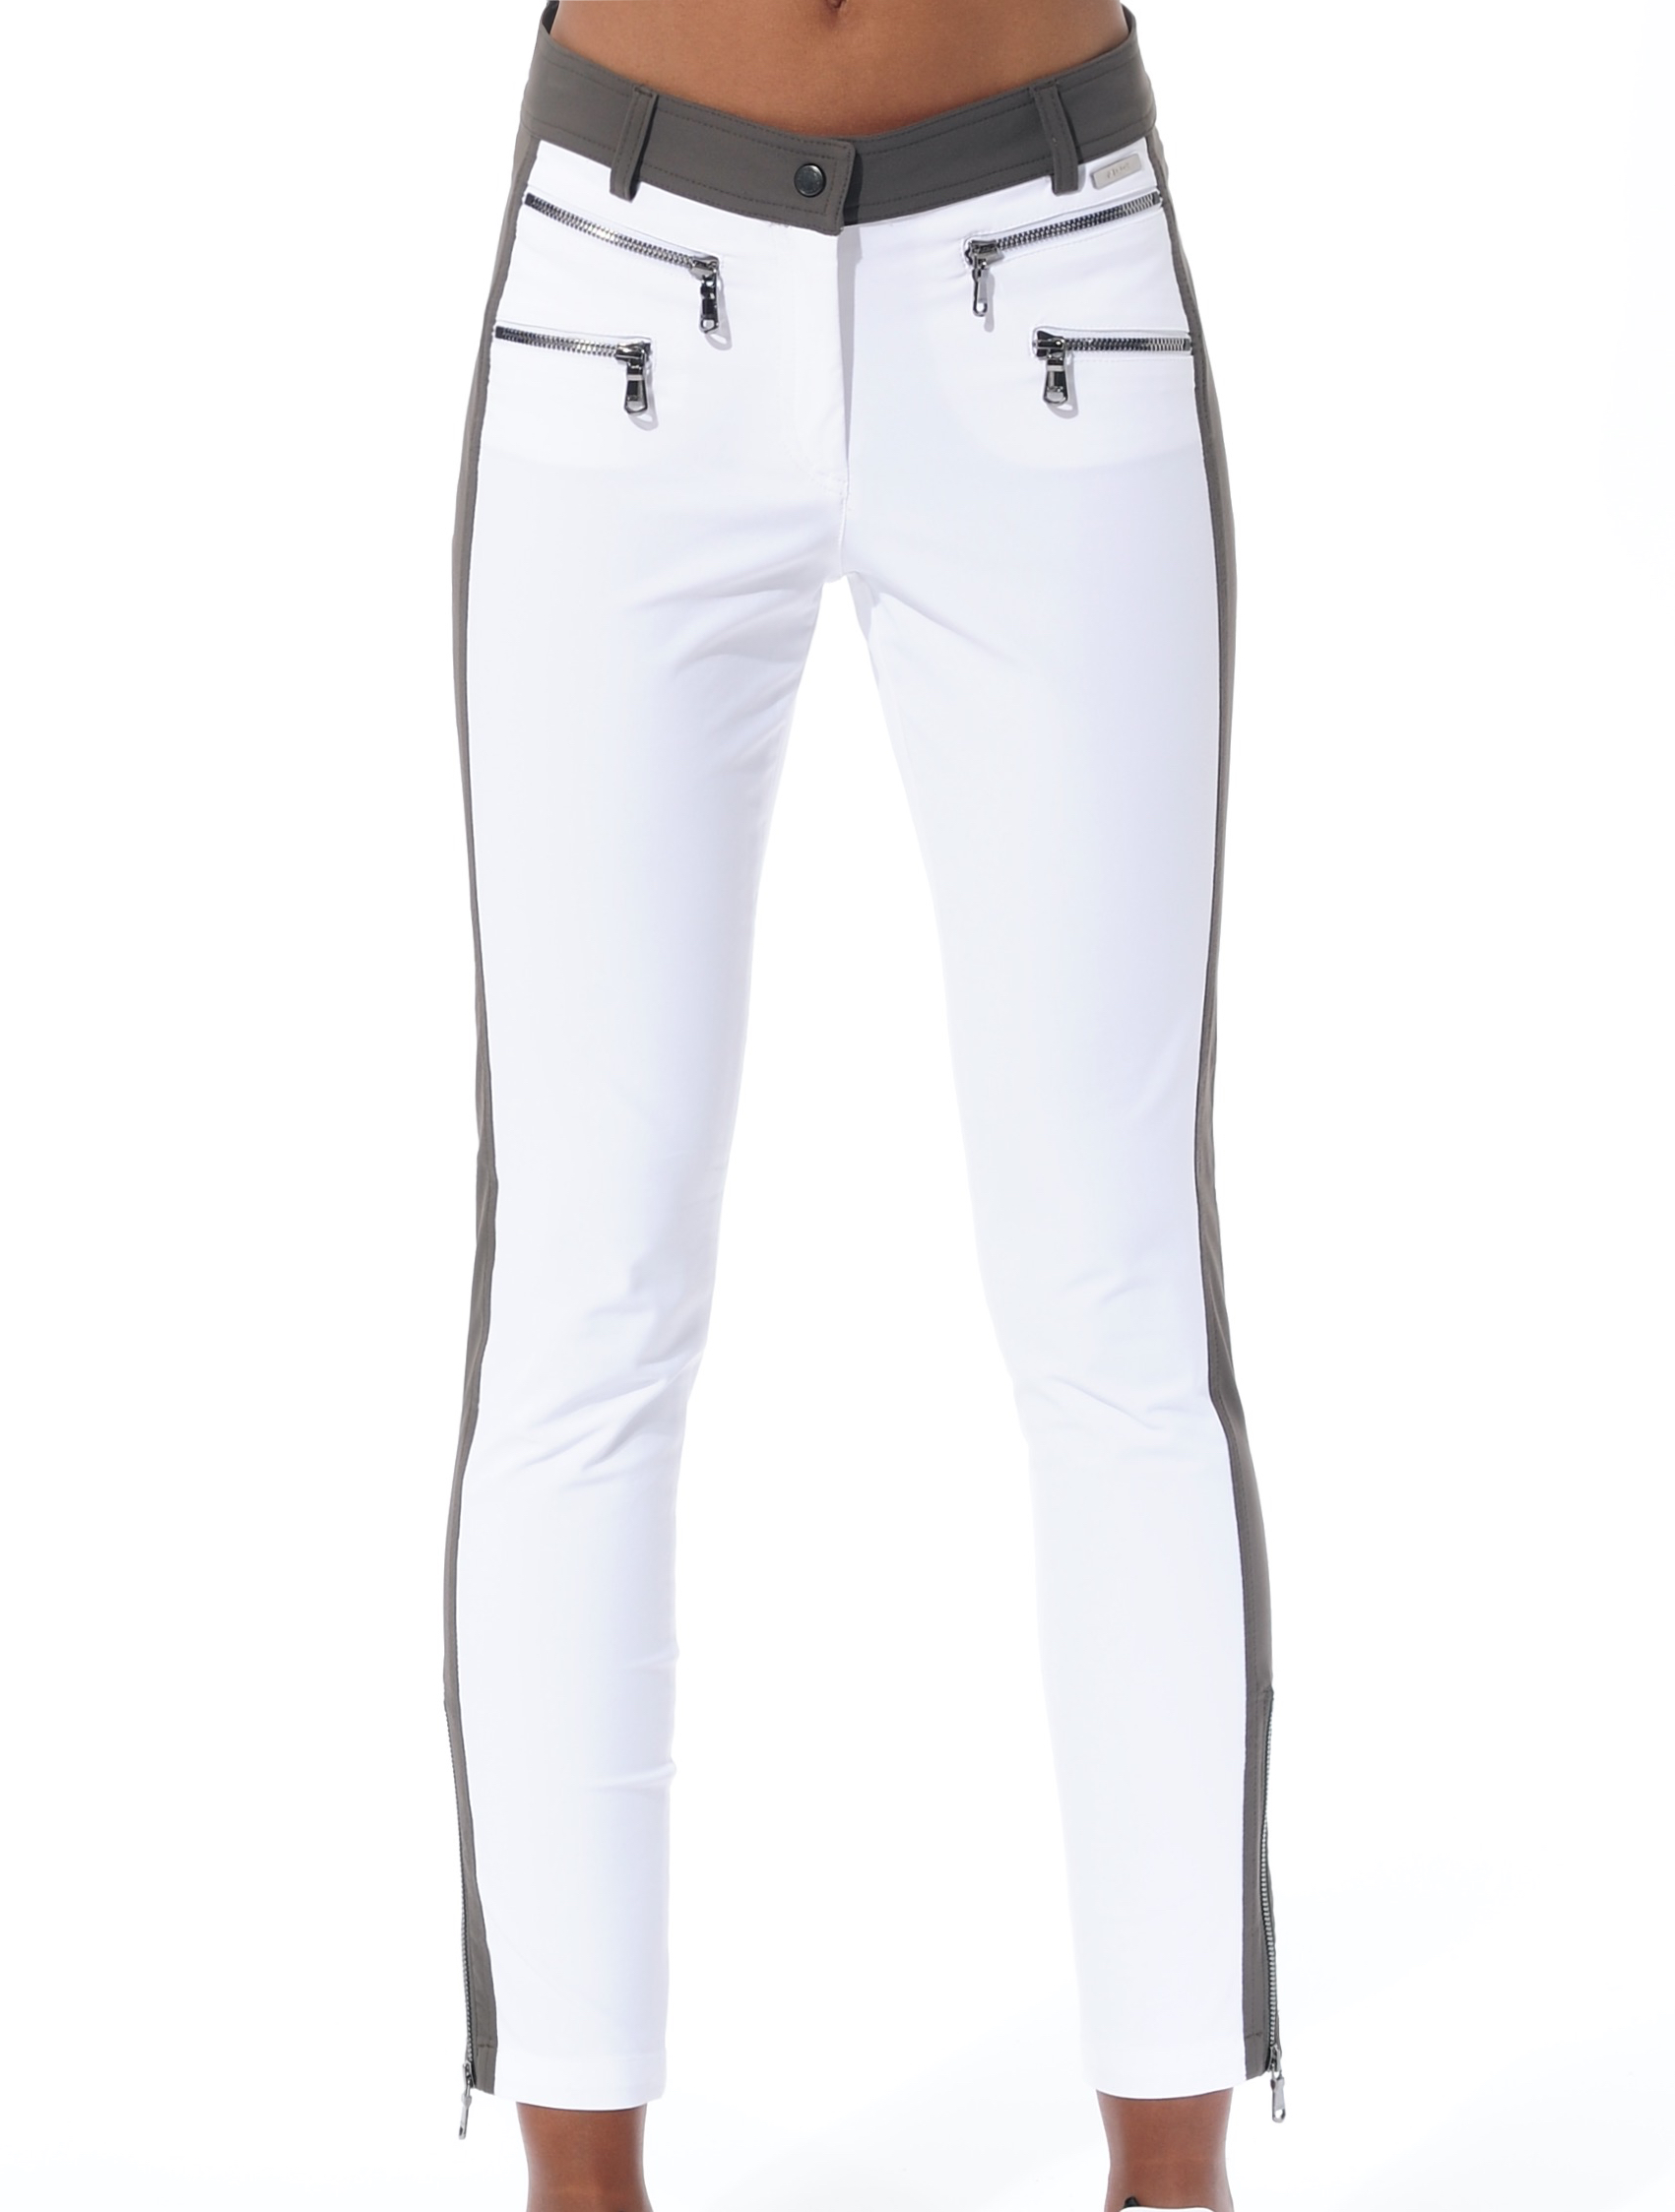 4way stretch double zip ankle pants white/stone 